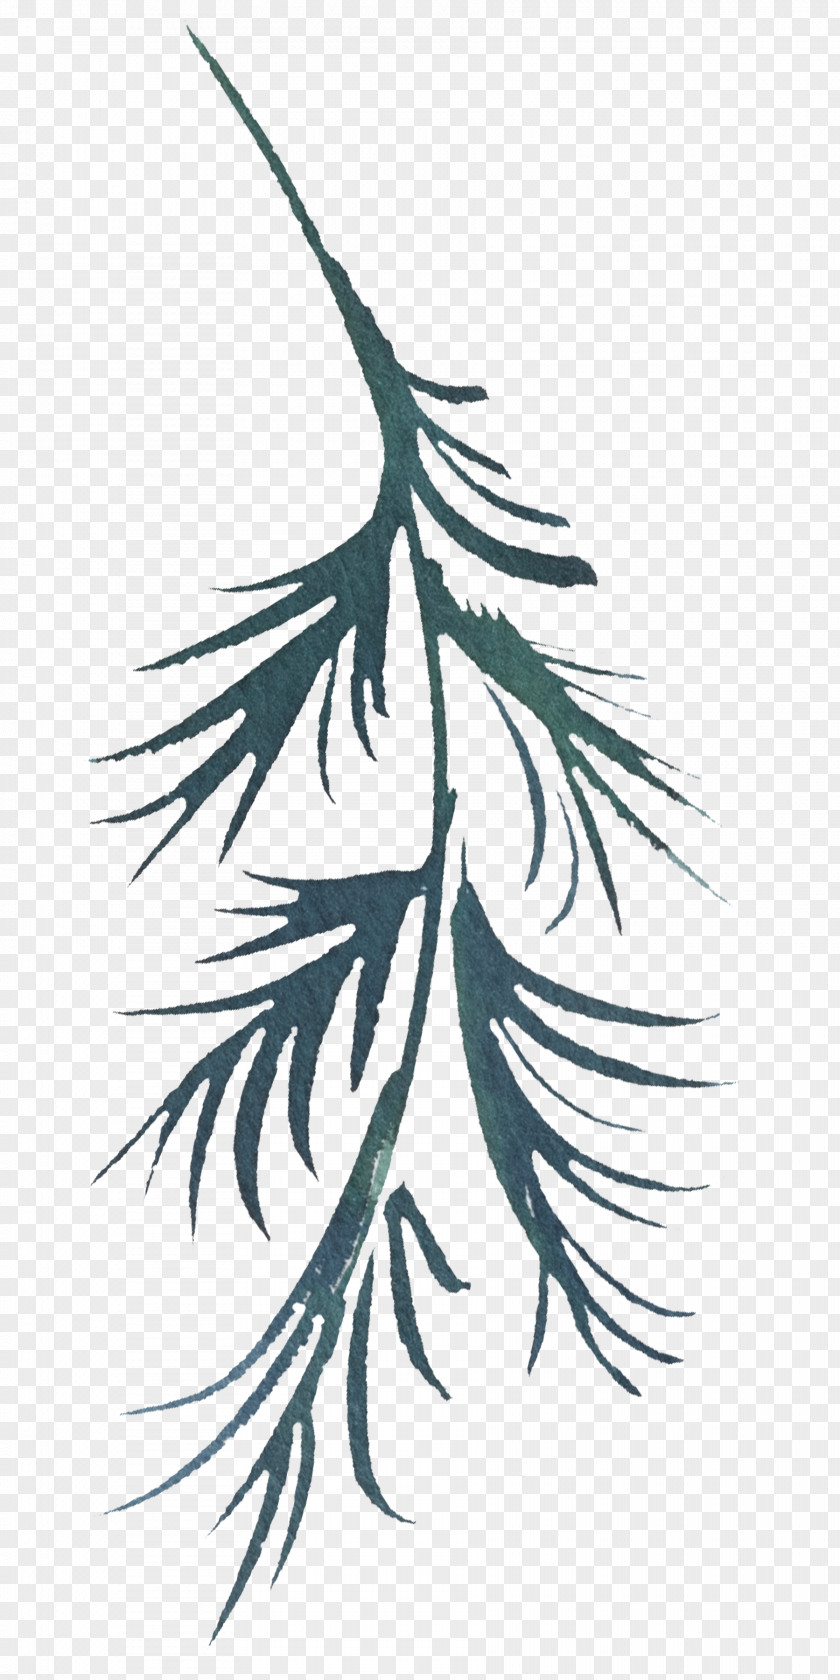 Colorado Spruce Feather PNG